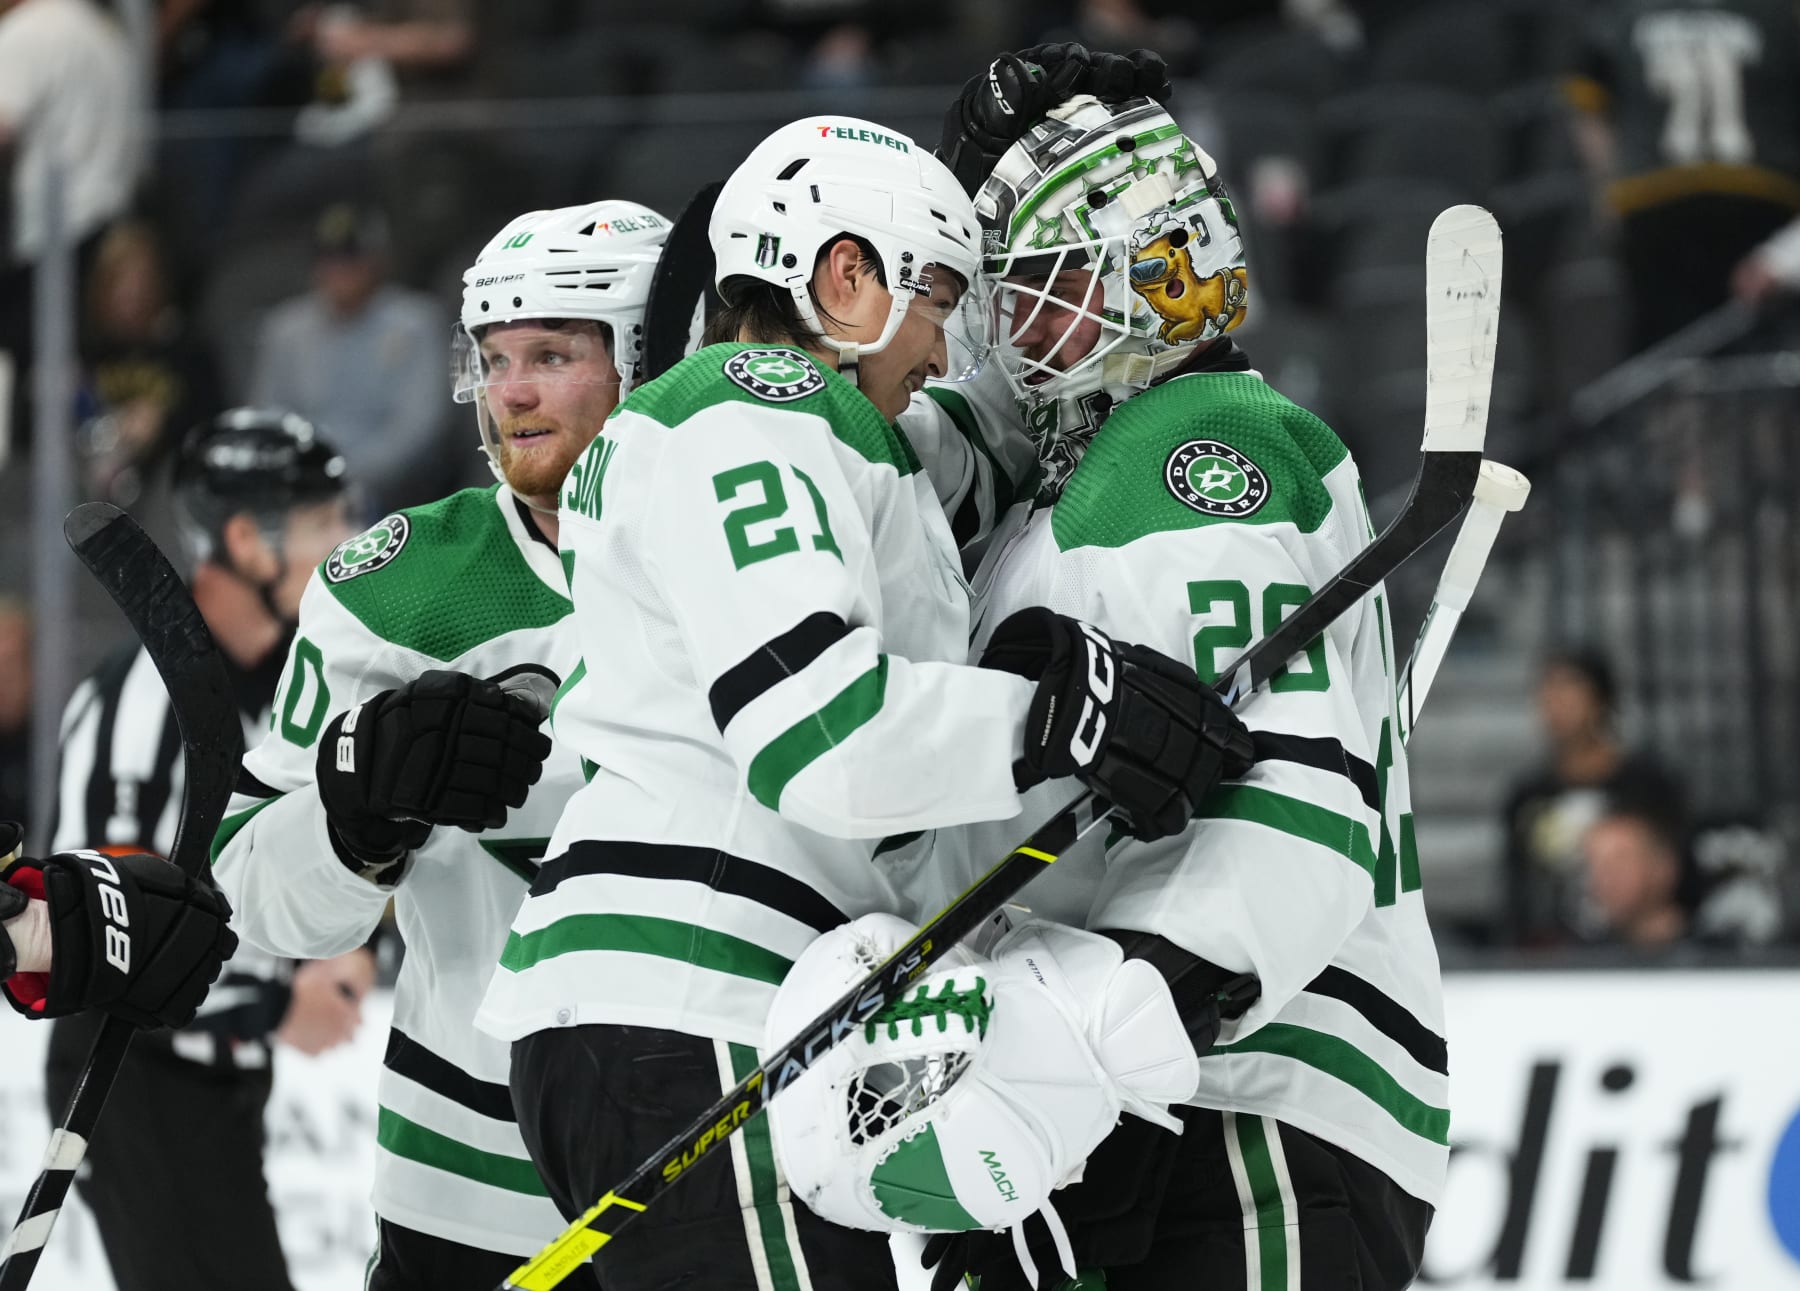 Flyers put up good effort, but lose in OT to Dallas Stars